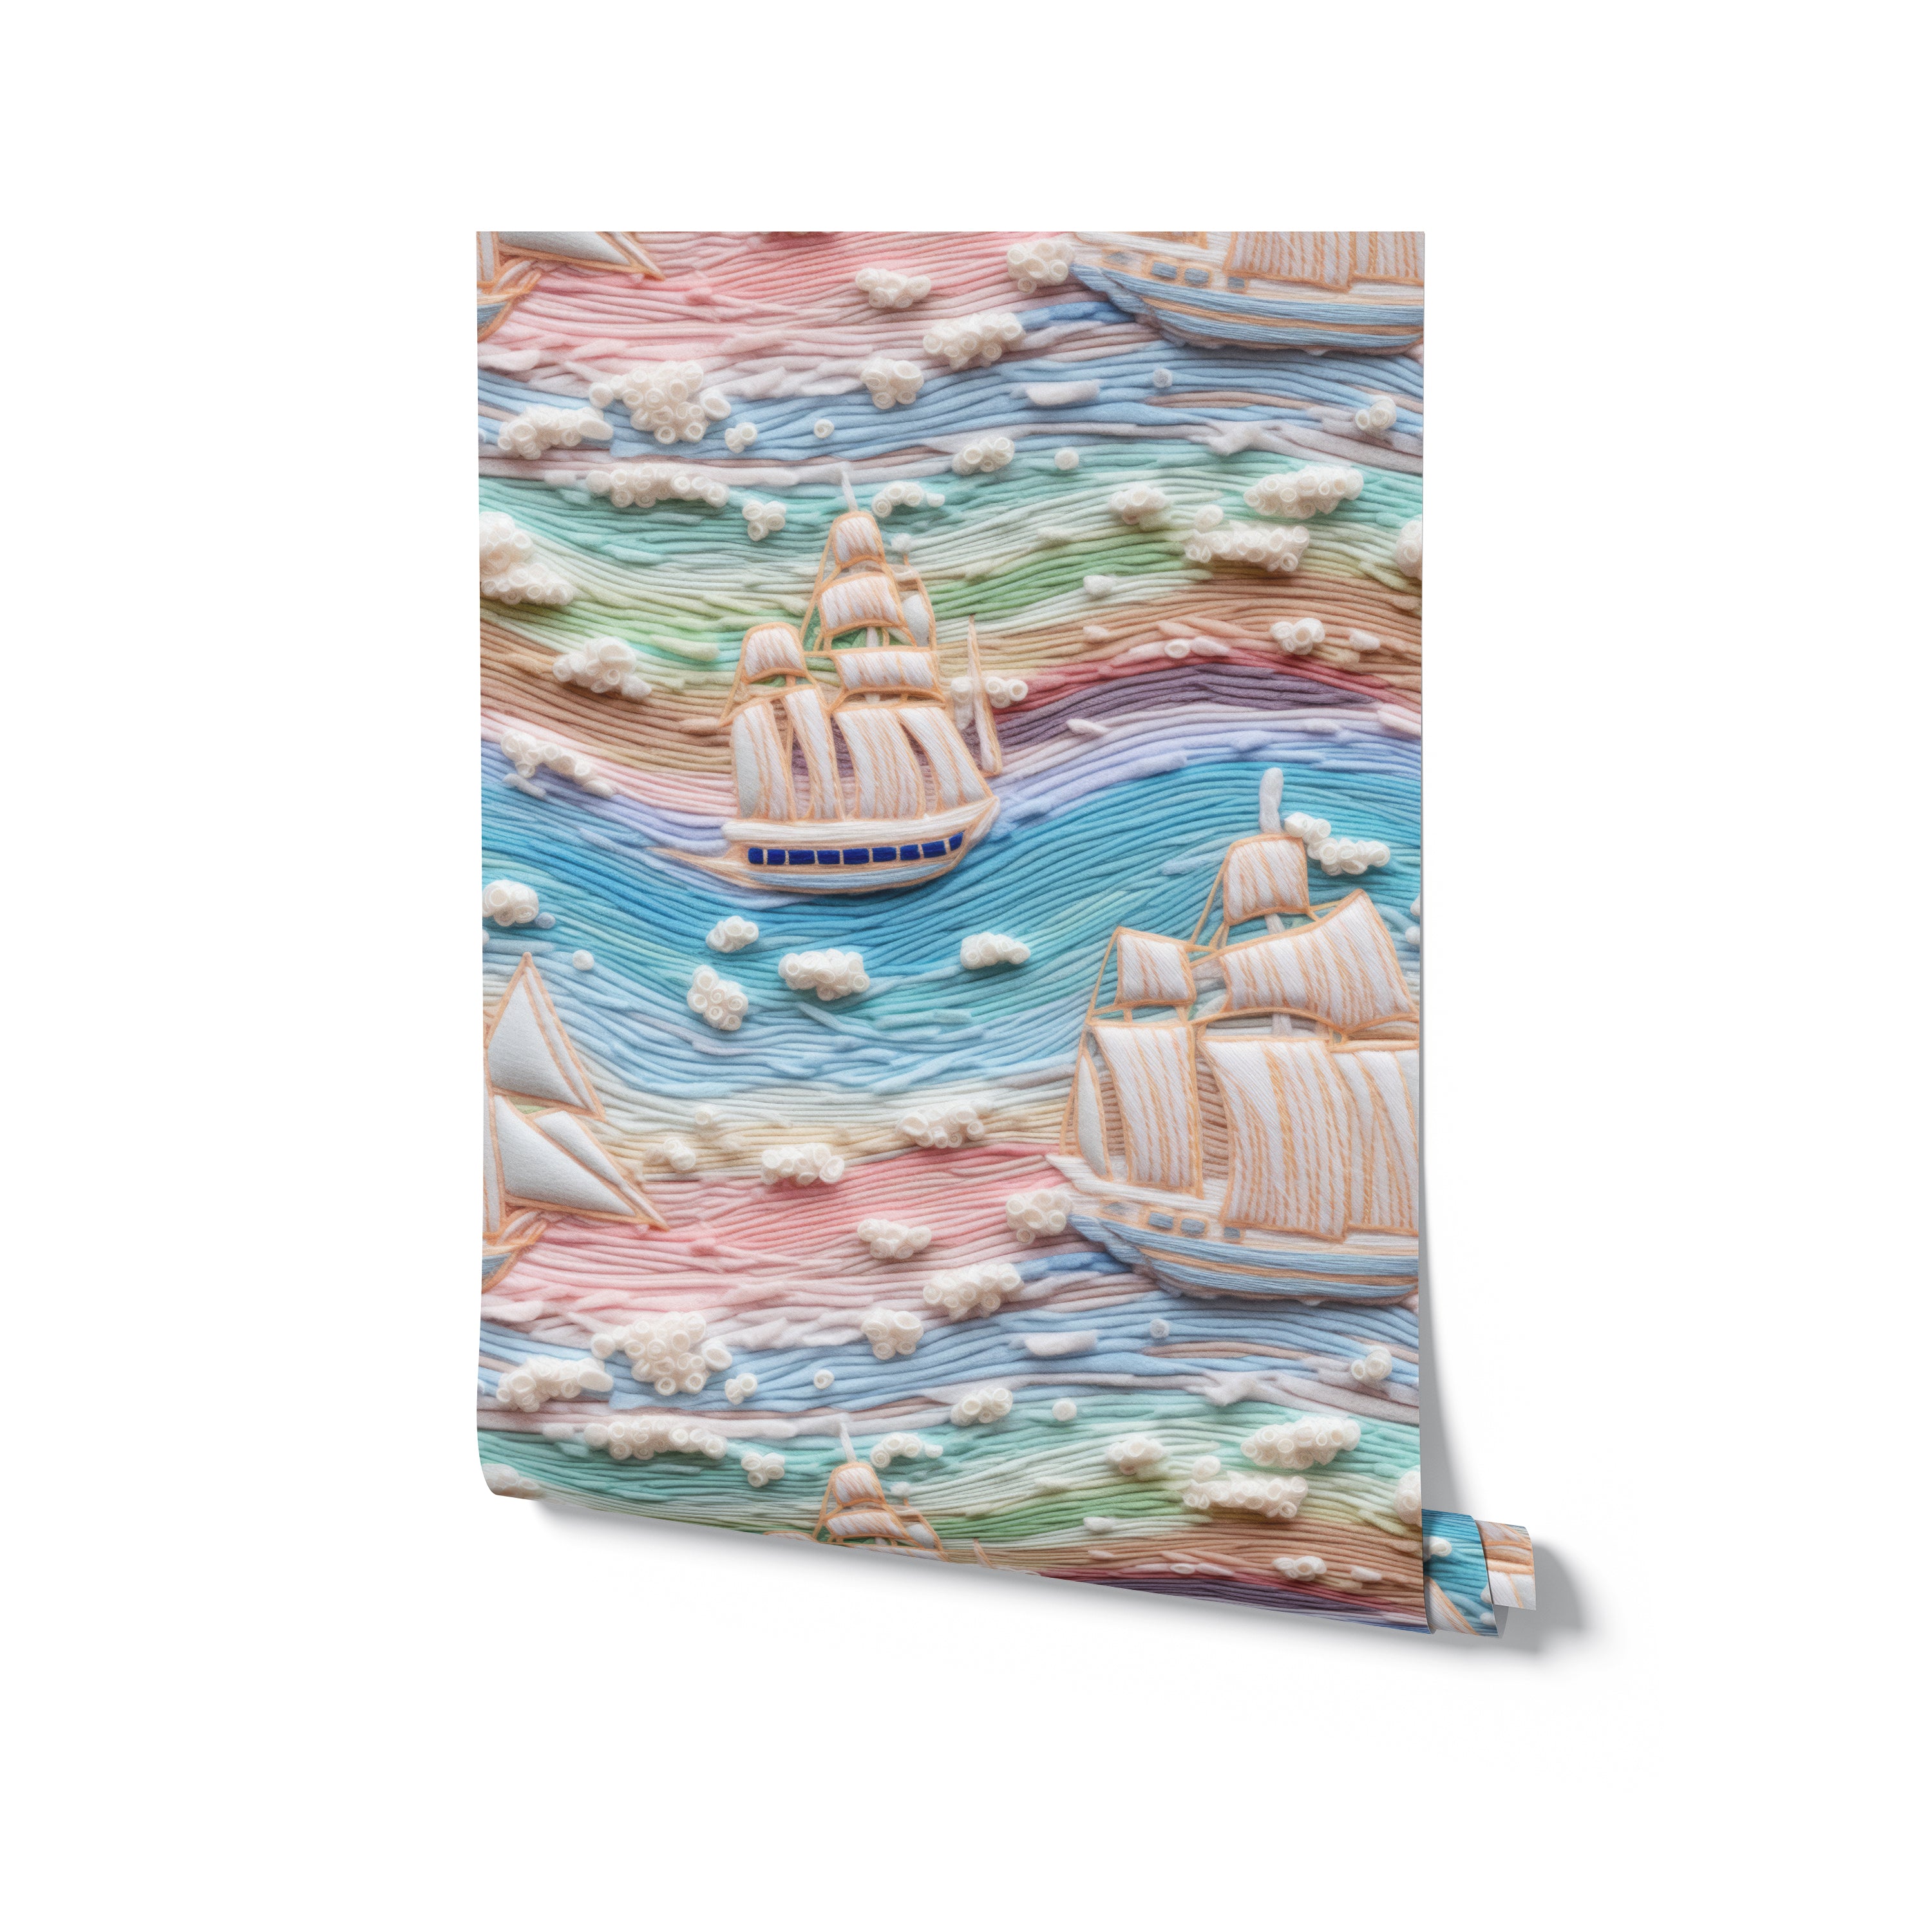 A single roll of Sunset Sail Wallpaper illustrating the beautiful gradient of sunset colors and detailed sailboats, ideal for adding a touch of nautical charm and color to any room or decor project.